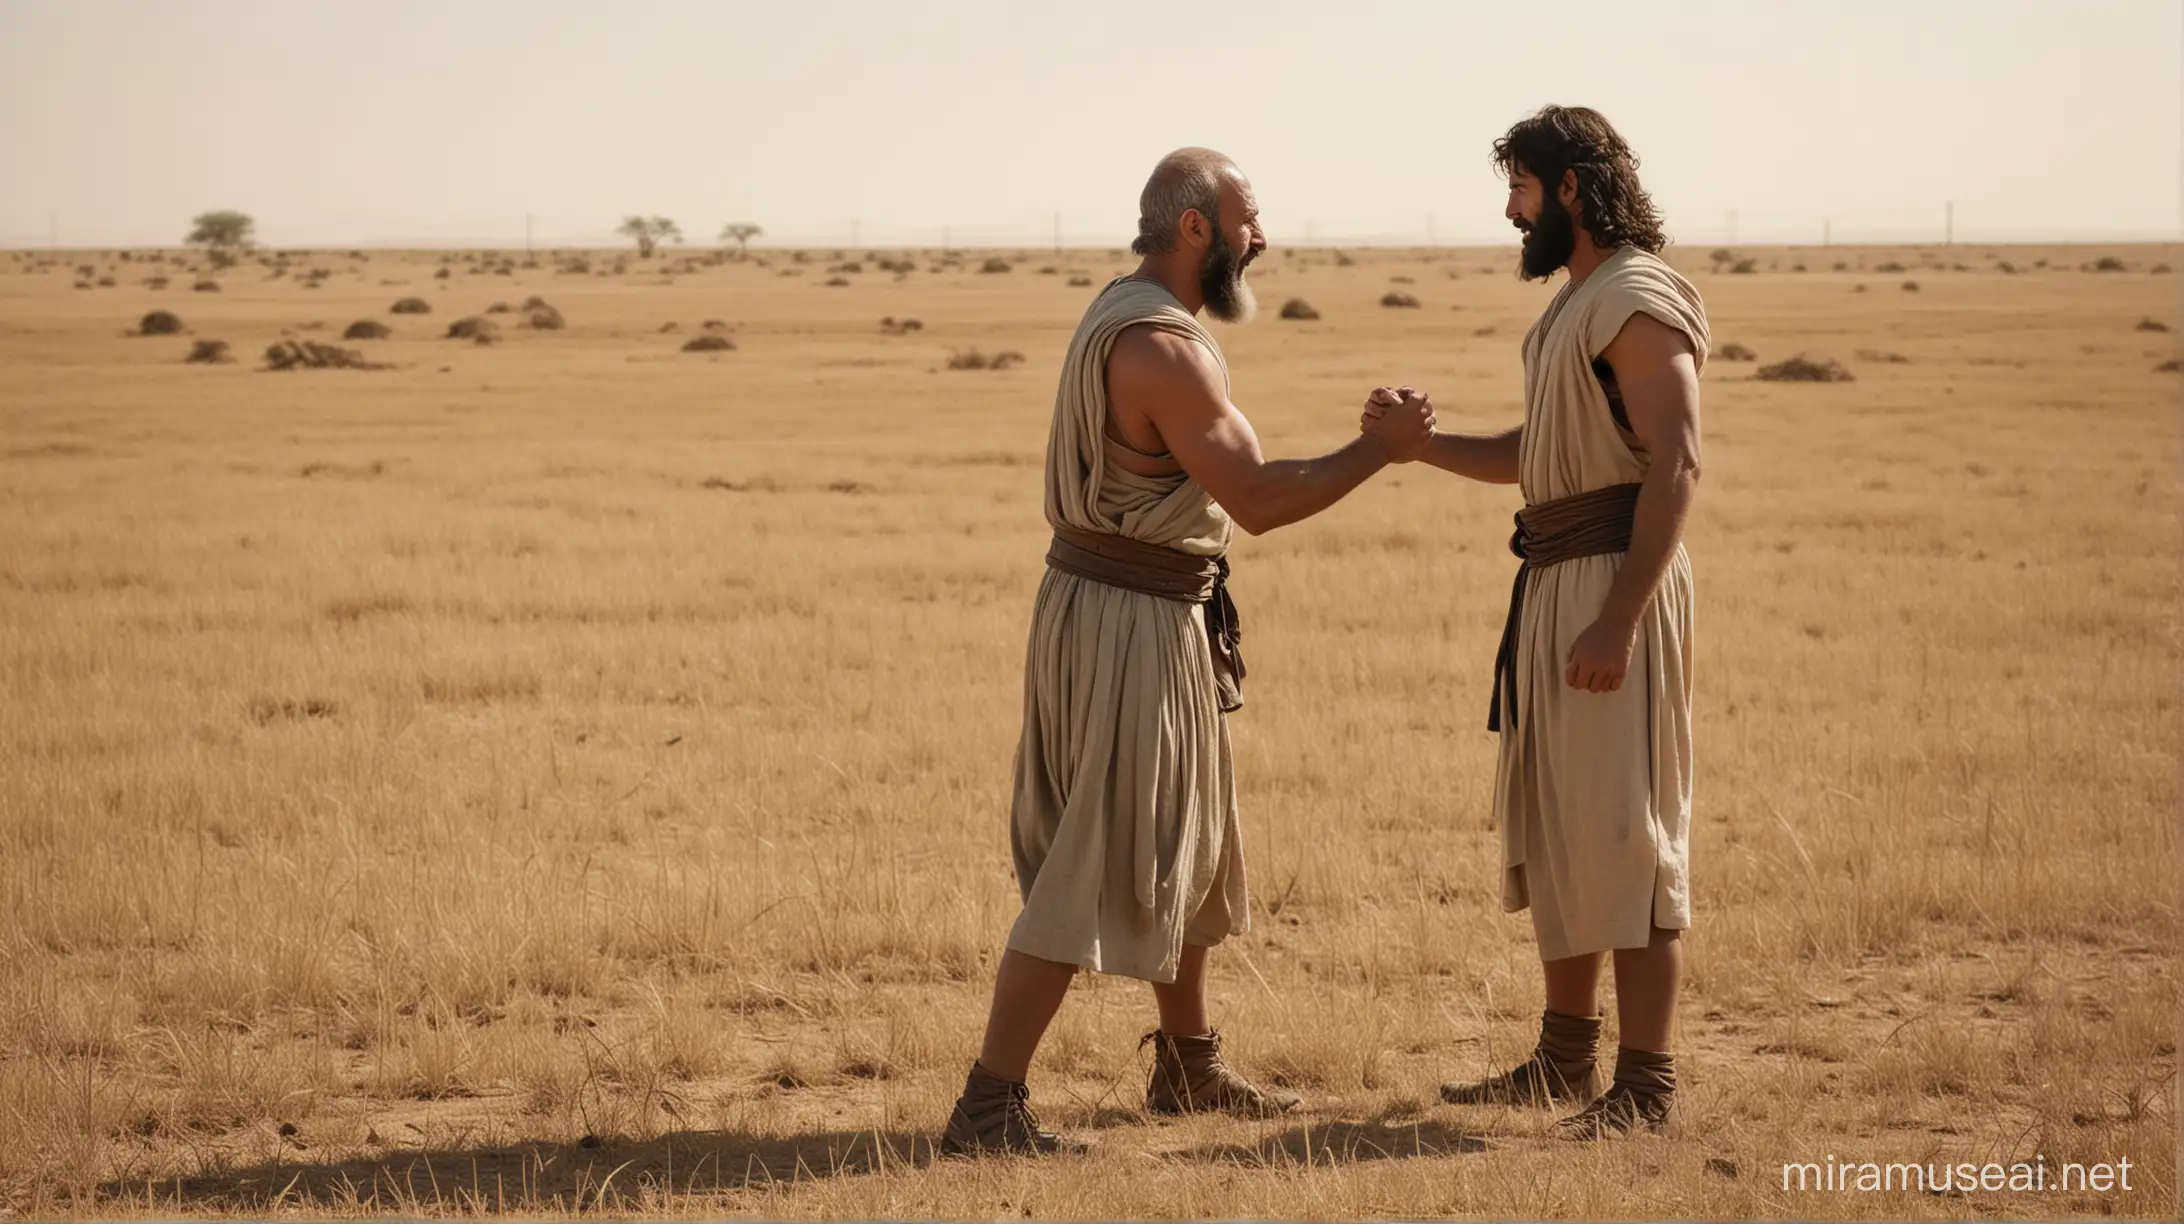 2 men  standing apart,  facing each, about to wrestle each, other in a field. Set in the middle east. During the biblical era of Moses